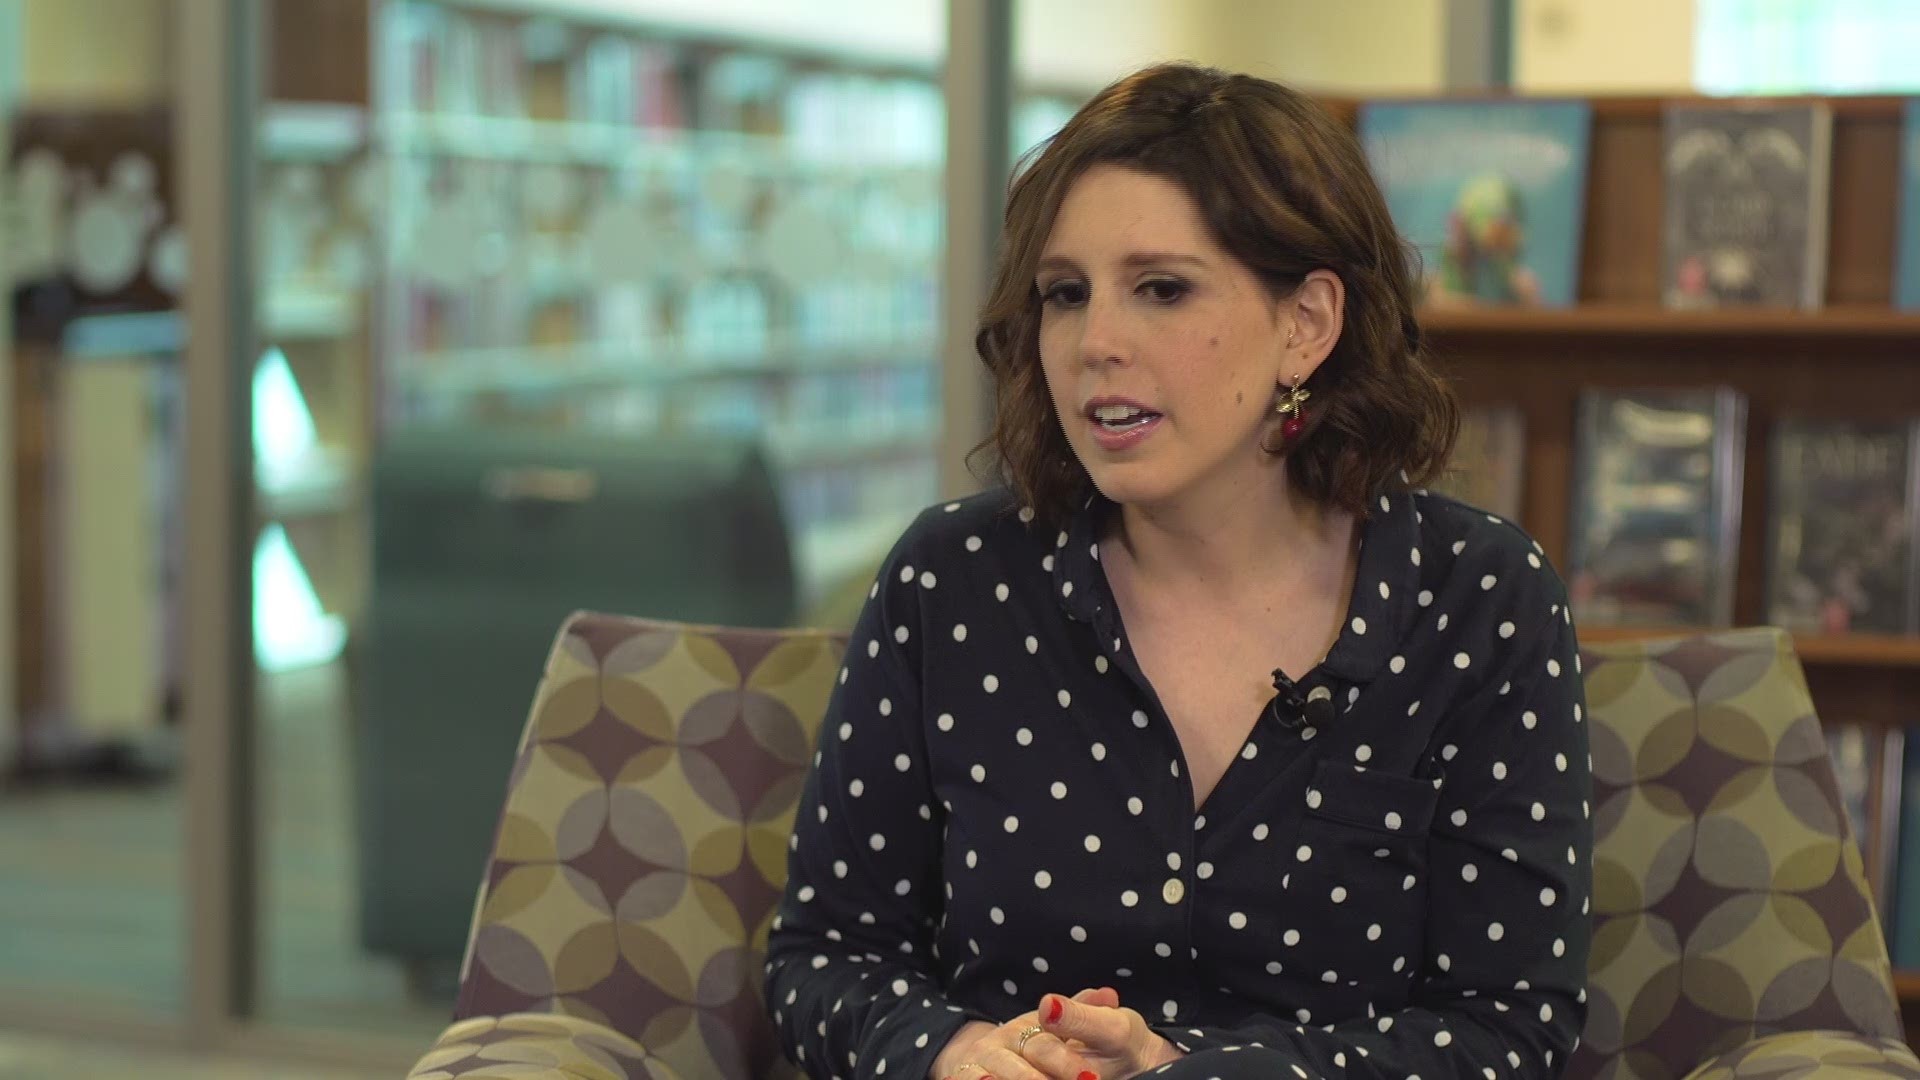 You've seen her on SNL, but did you know she's from Cleveland? Actress Vanessa Bayer sat down with us for a chat. Among her Cleveland faves? Heinen's. See the full interview on WKYC June 17 at 11 p.m.